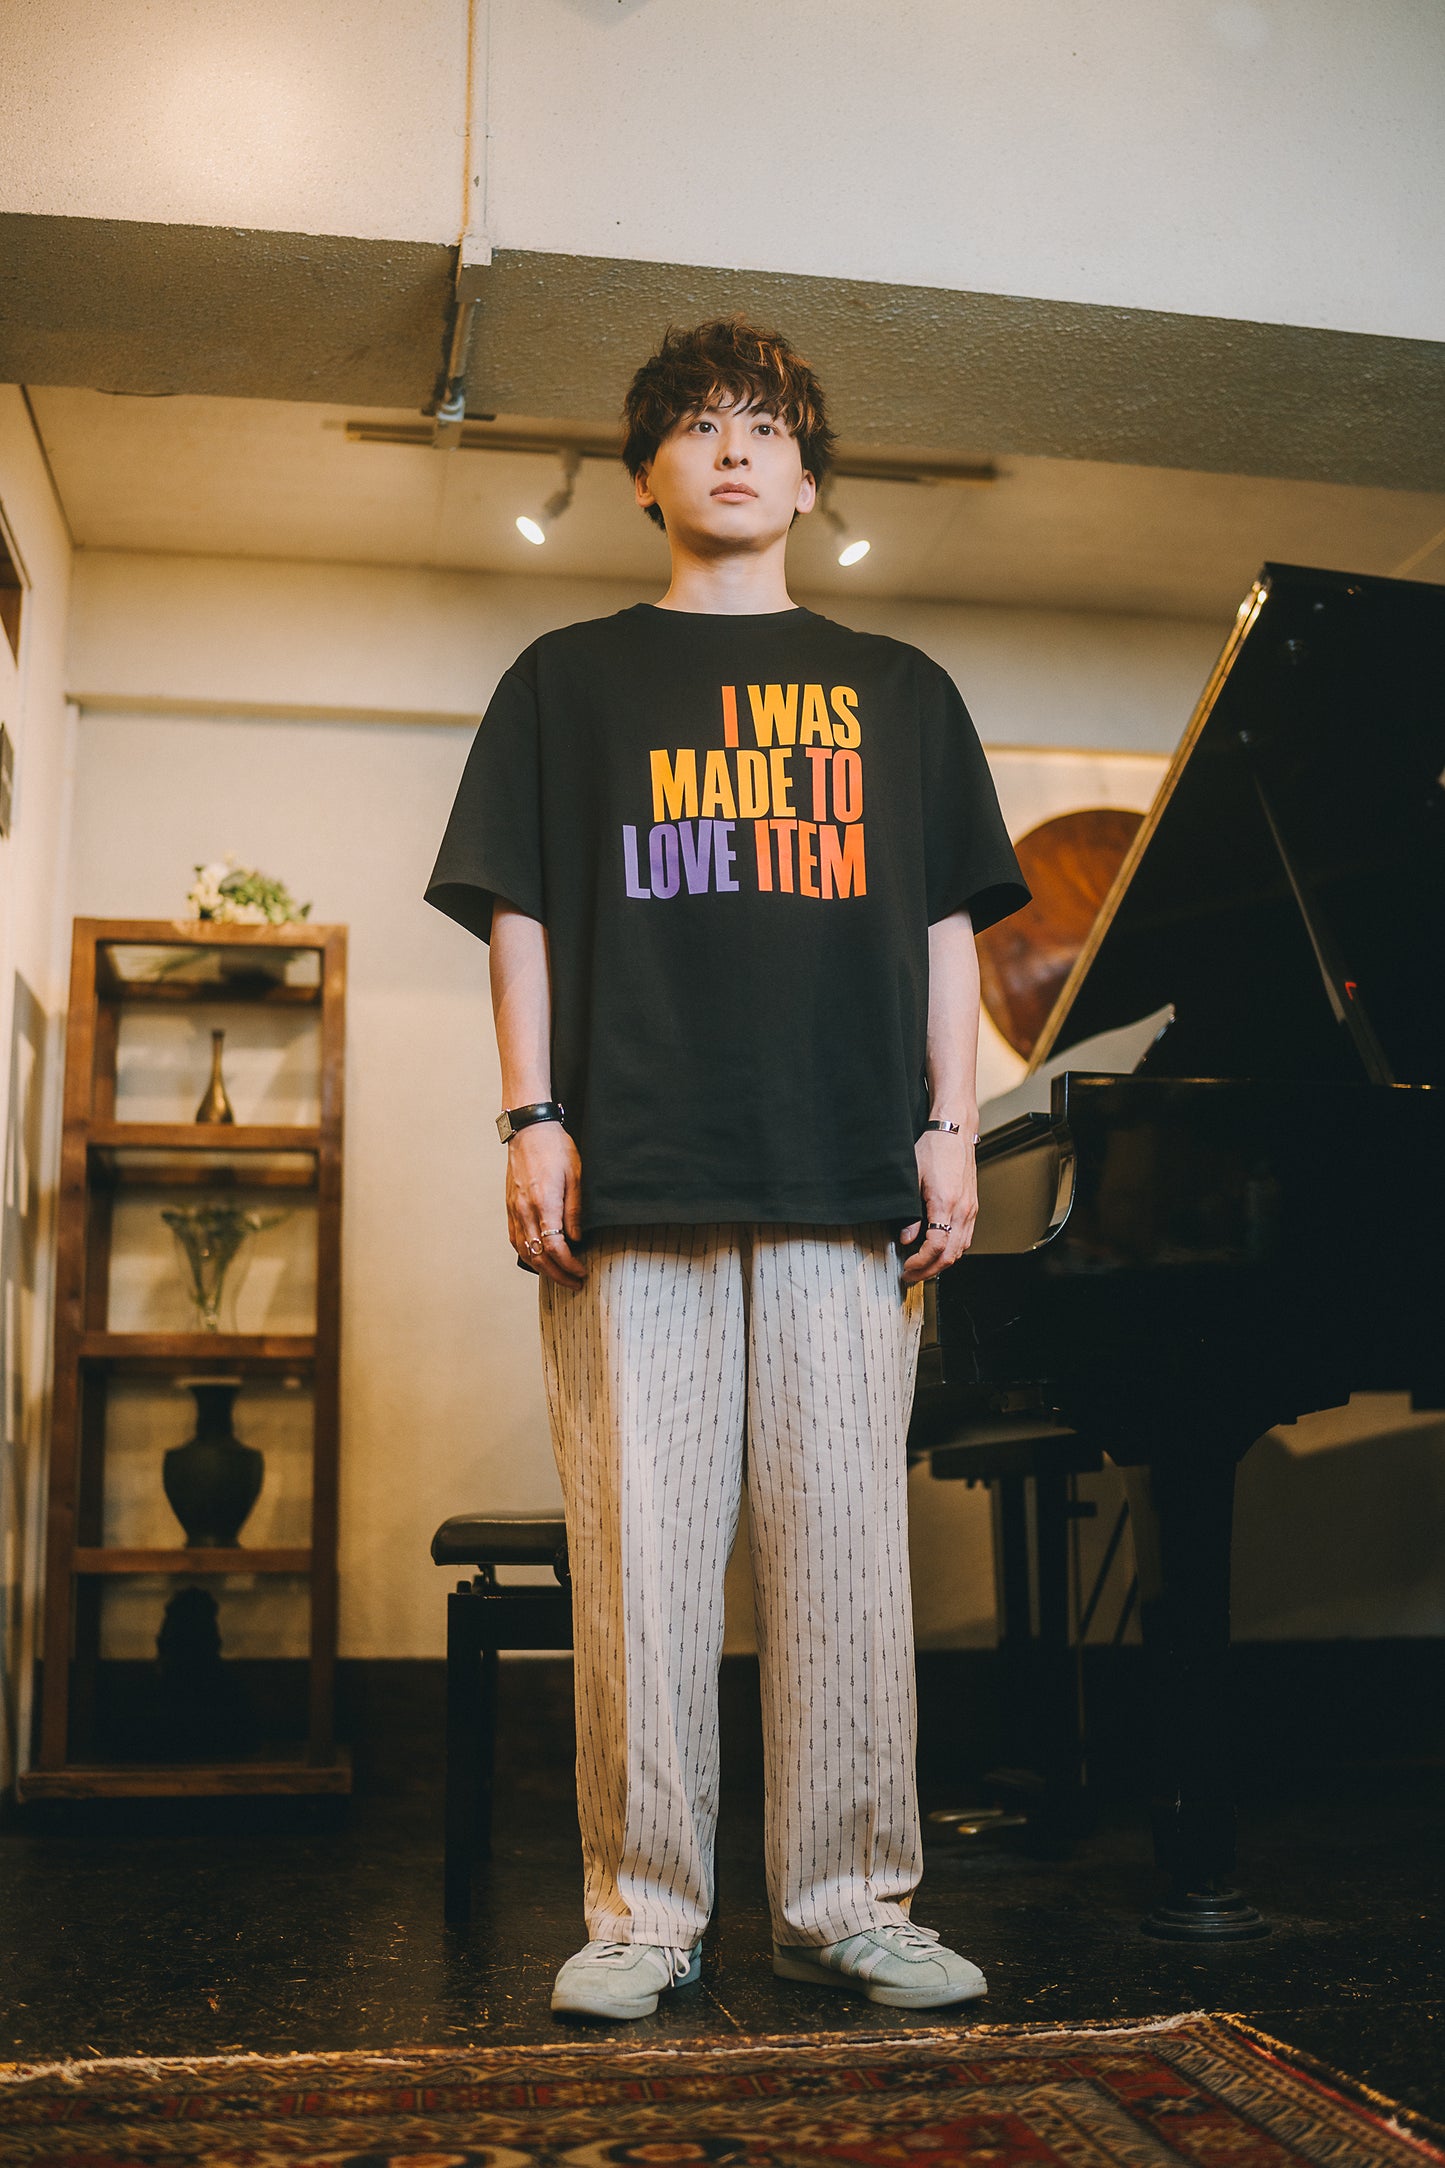 I WAS MADE TO LOVE ITEM tee